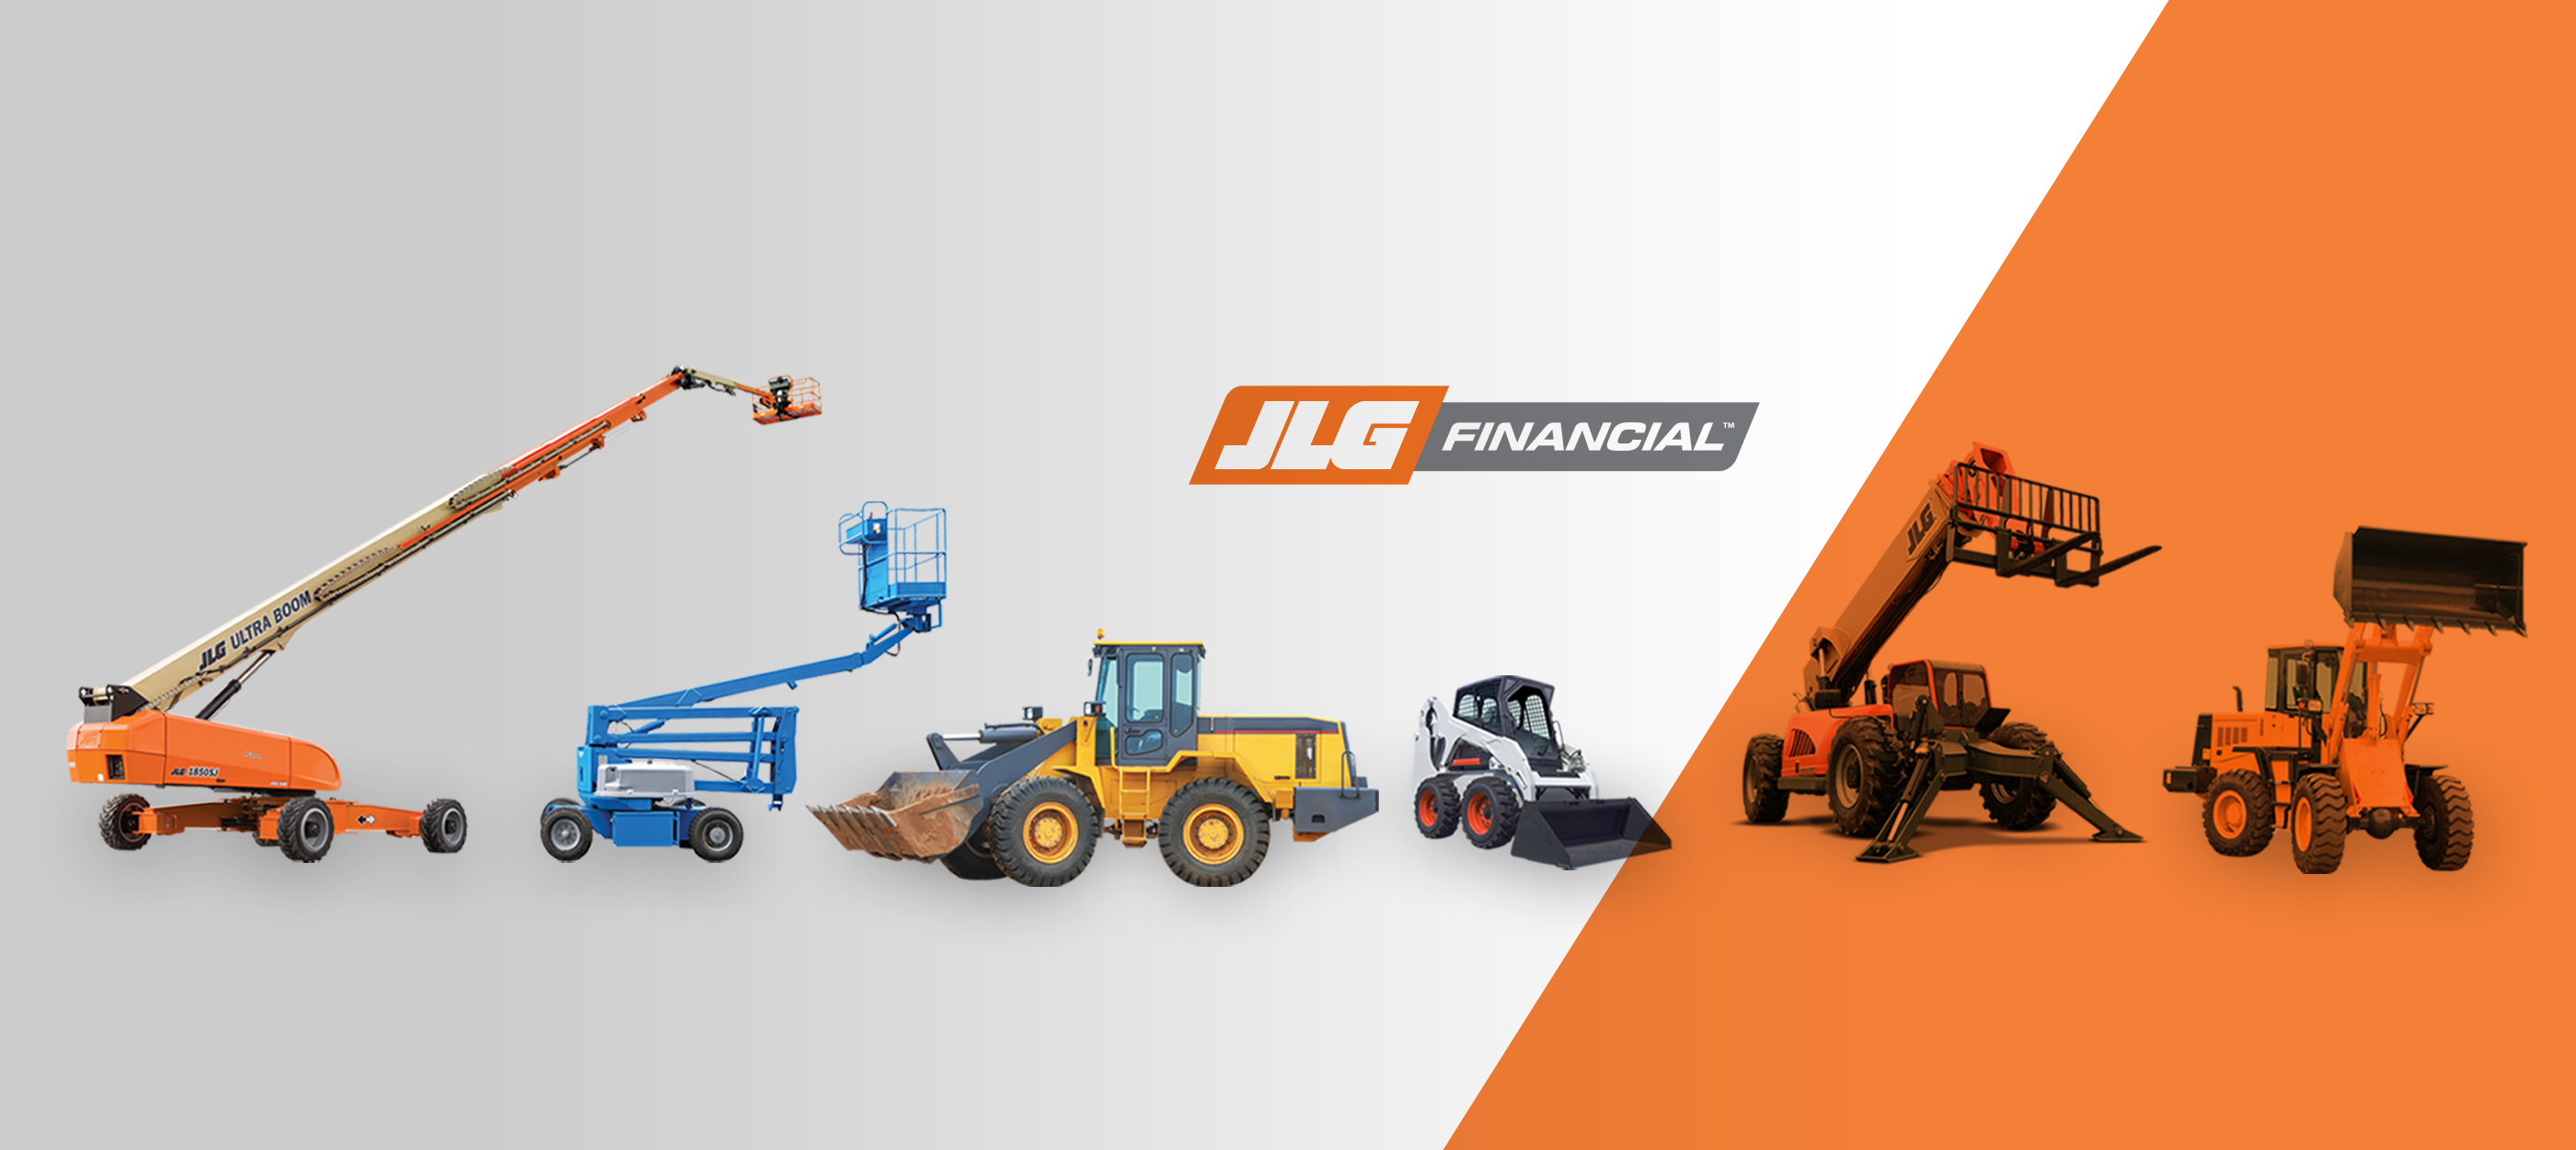 New partnership allows Canadian customers fast and flexible equipment financing 